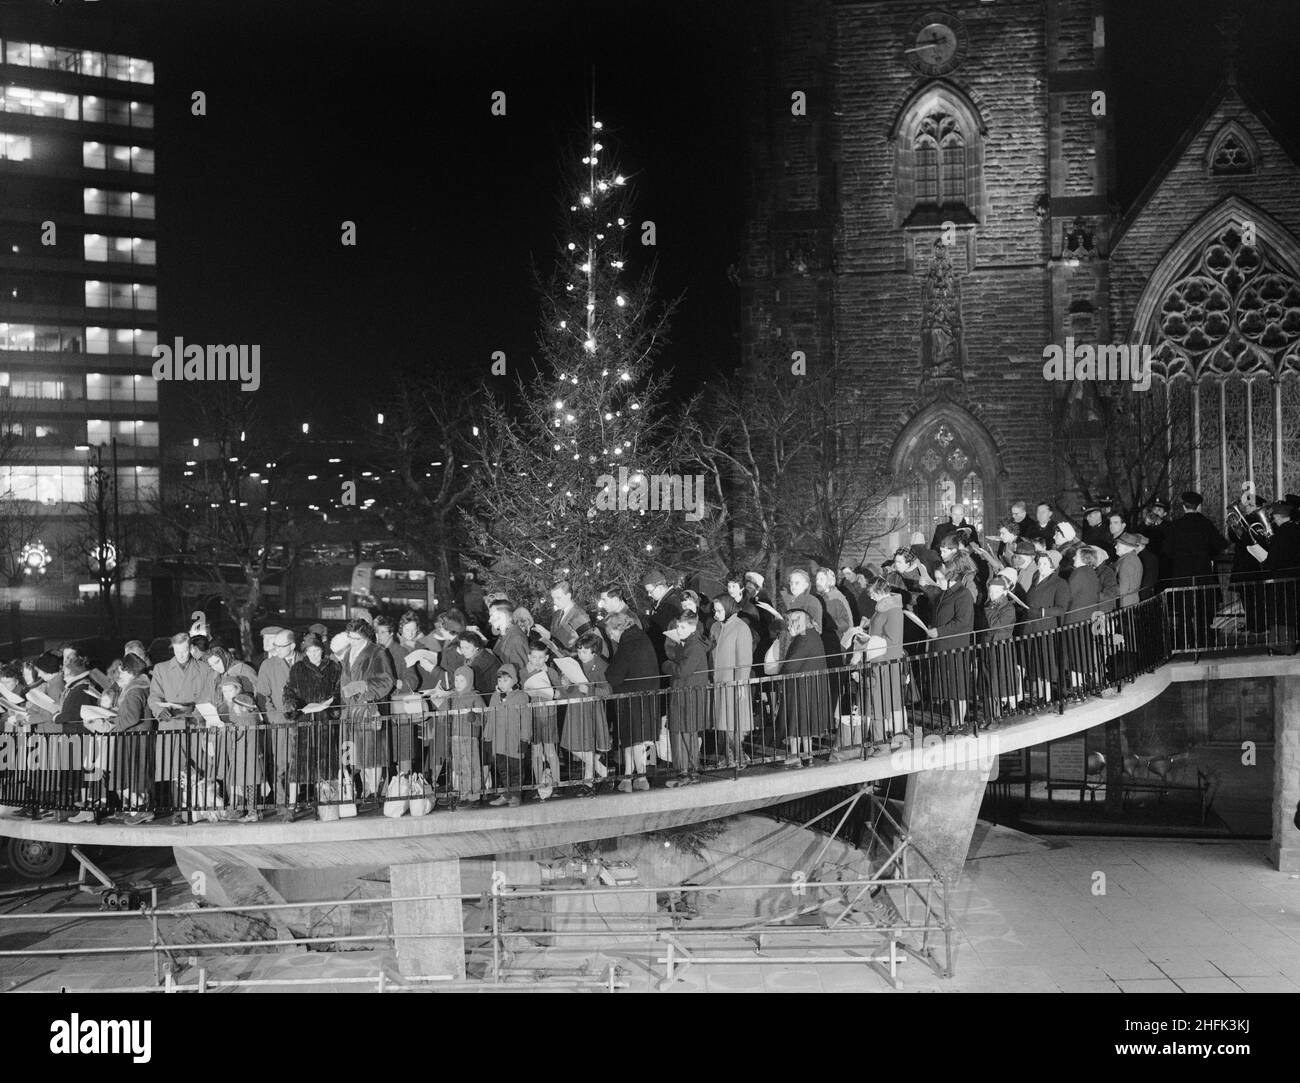 Bull Ring Centre, Birmingham, 23/12/1963. A carol service being held on the spiral ramp at the Bull Ring Centre, with the Church of St Martin in the background. Stock Photo